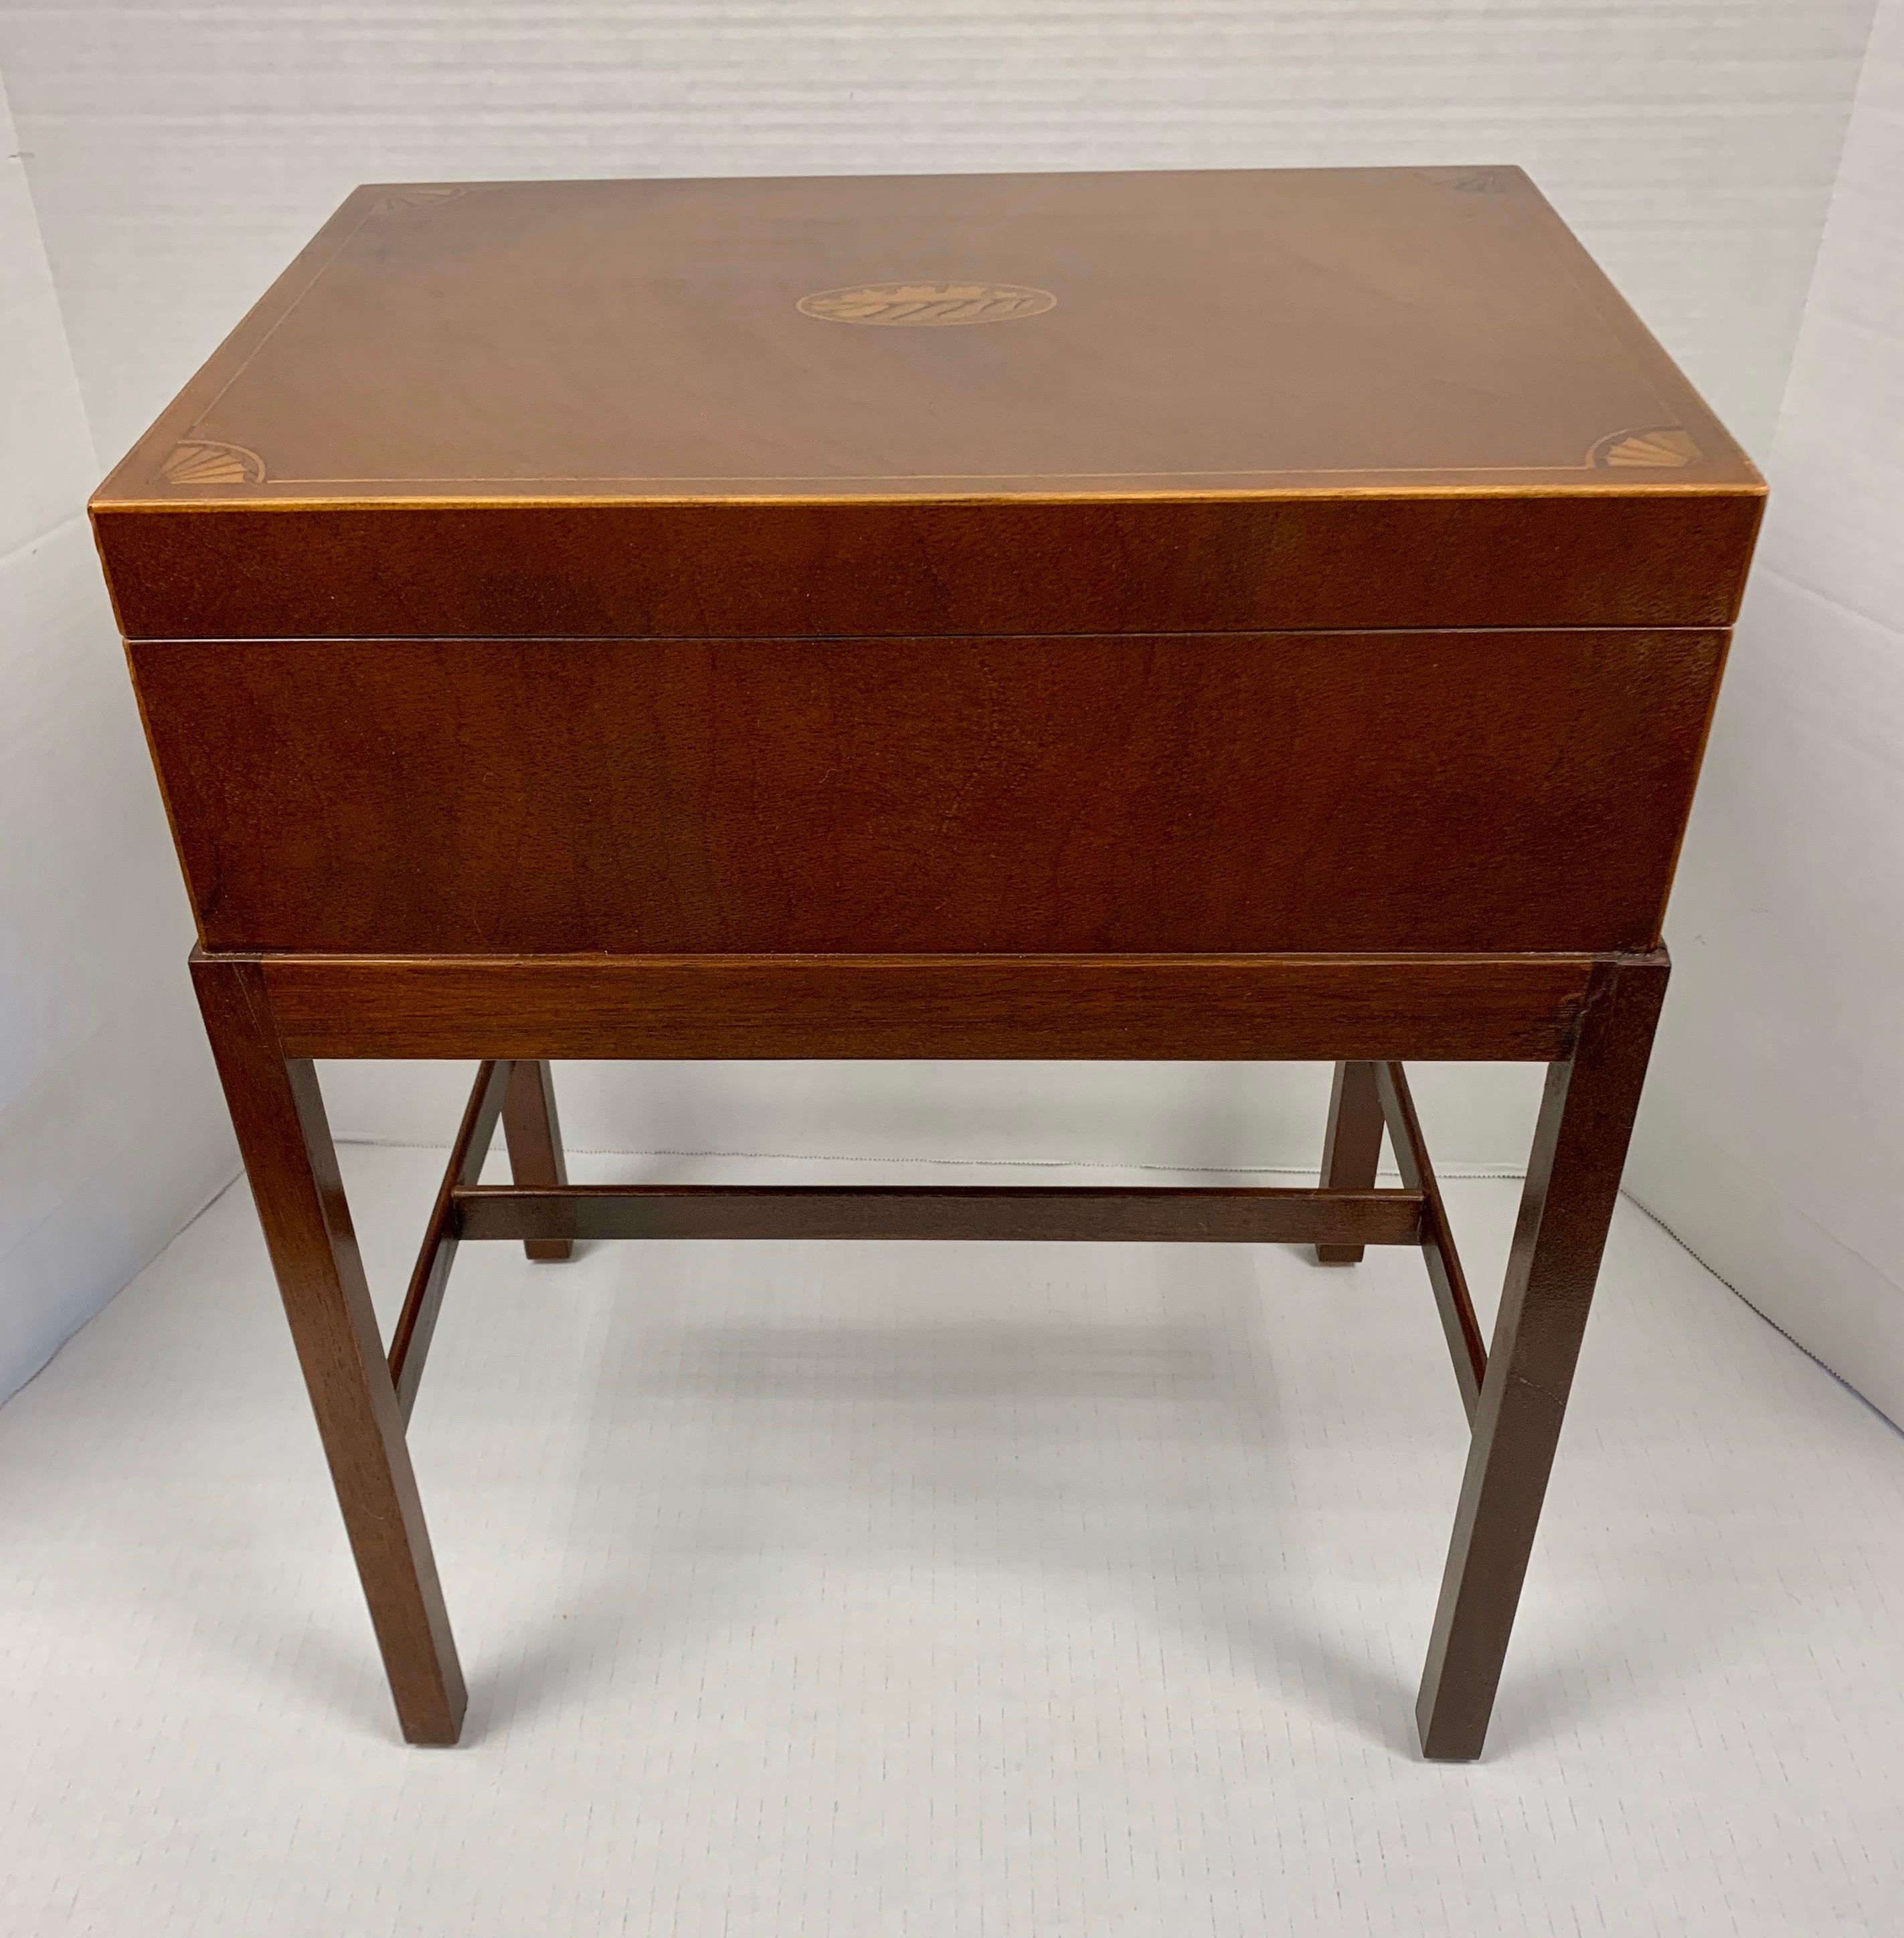 Handsome mahogany box on stand can function as a small side table while storing your smaller items like remote controls. Beautiful oval and line inlay detail. By Baker Furniture.